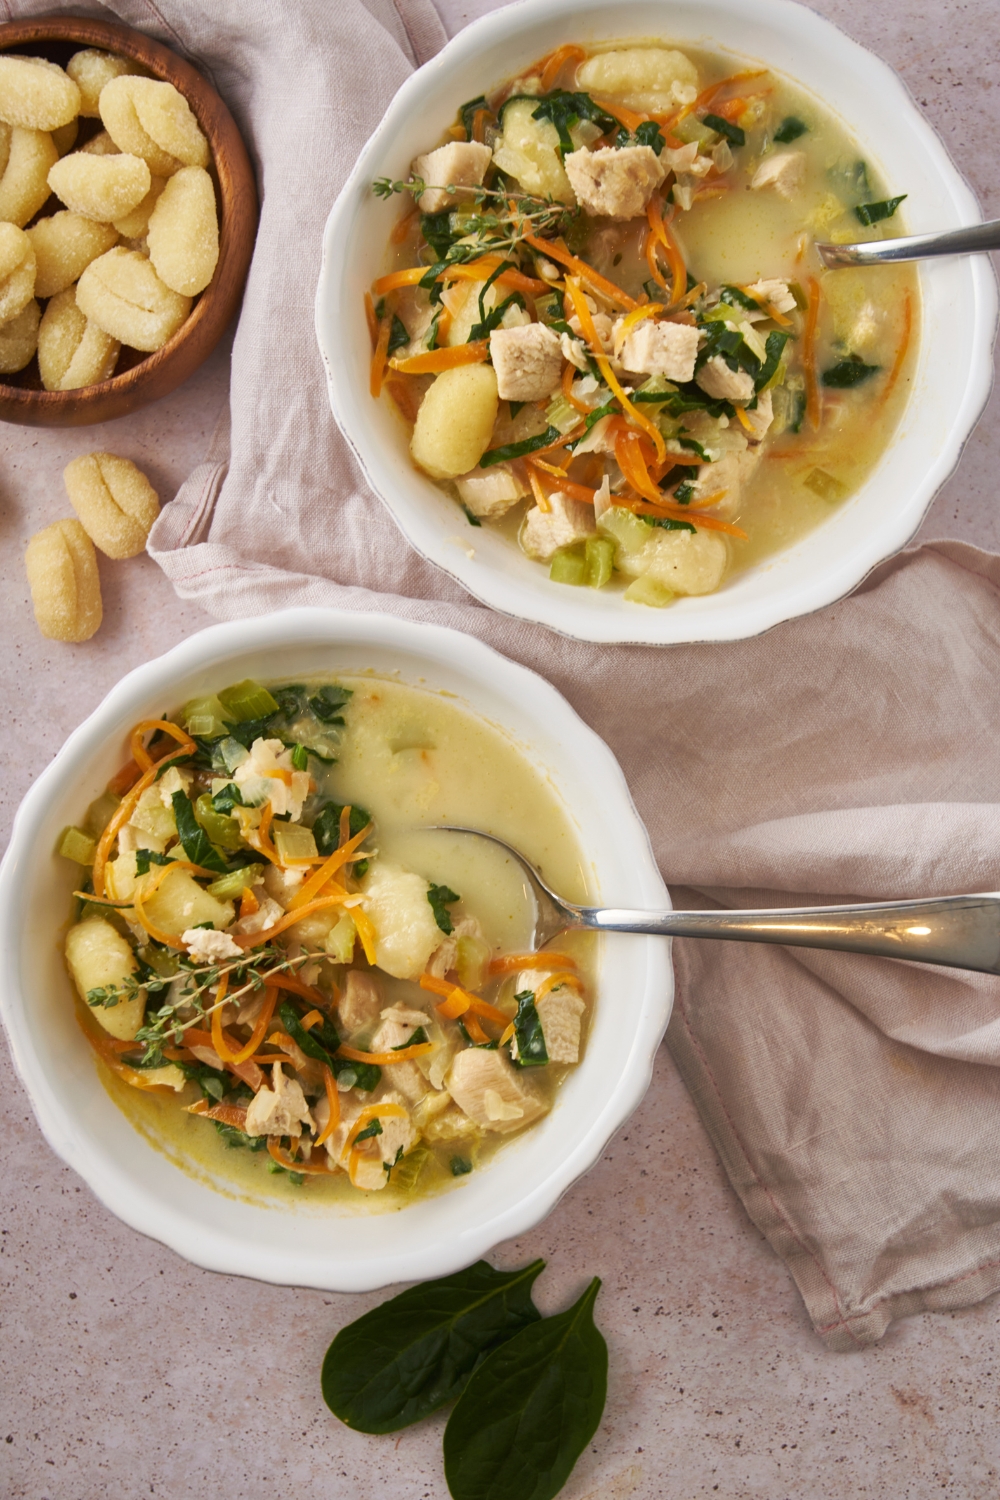 Overhead view of two bowls of chicken gnocchi soup with spinach, diced celery, and shredded carrots in them.